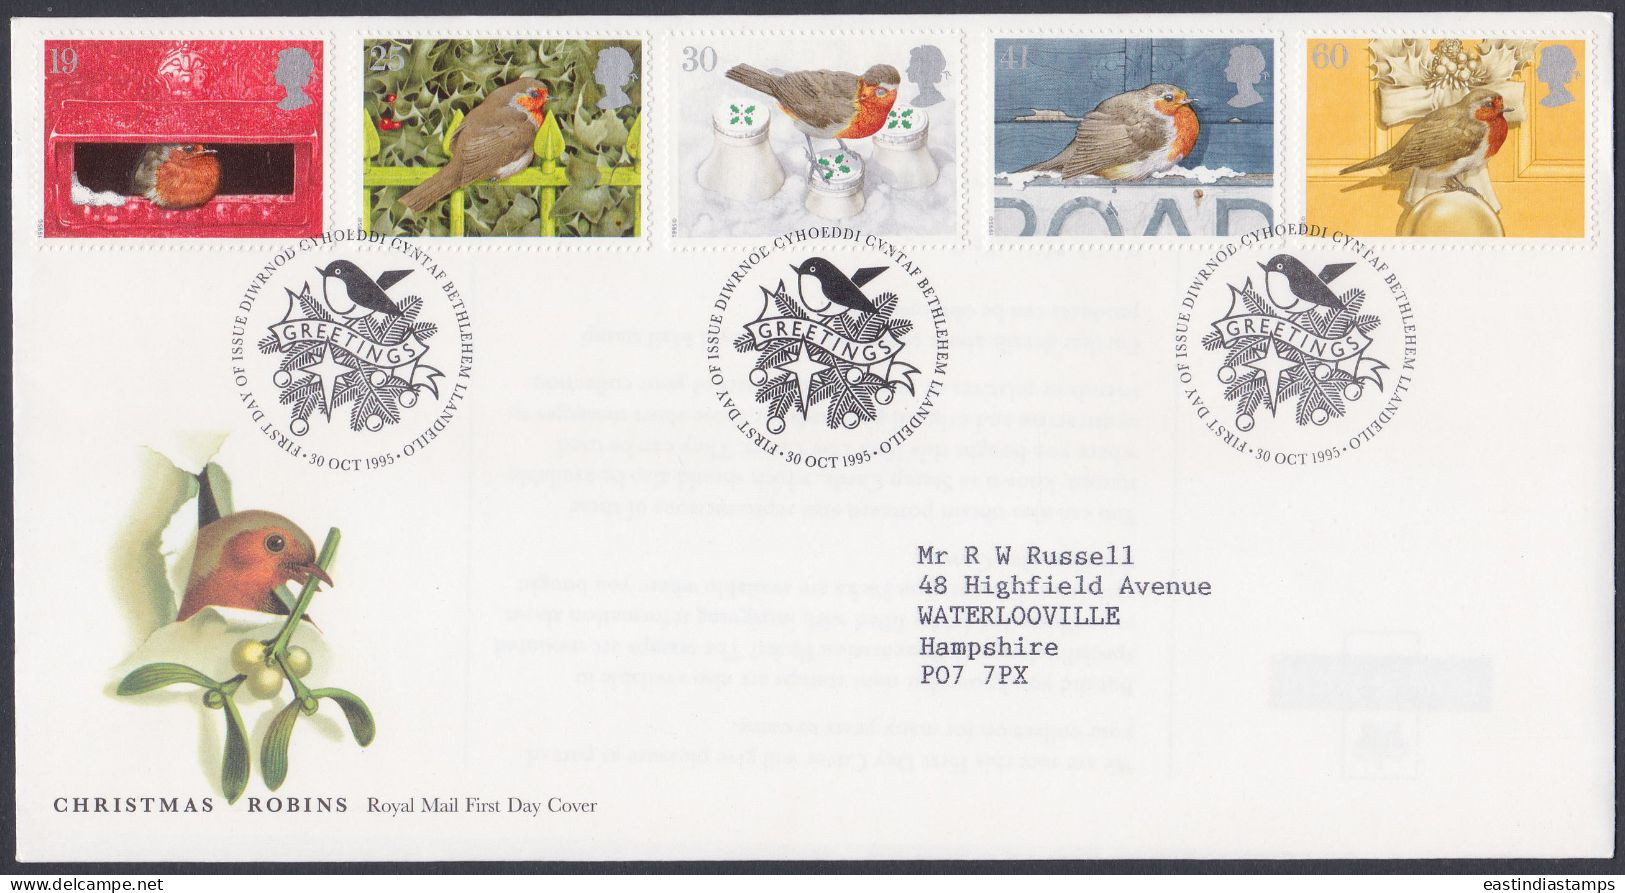 GB Great Britain 1995 FDC Christmas Robins, Robin, Bird, Birds, Pictorial Postmark, First Day Cover - Covers & Documents